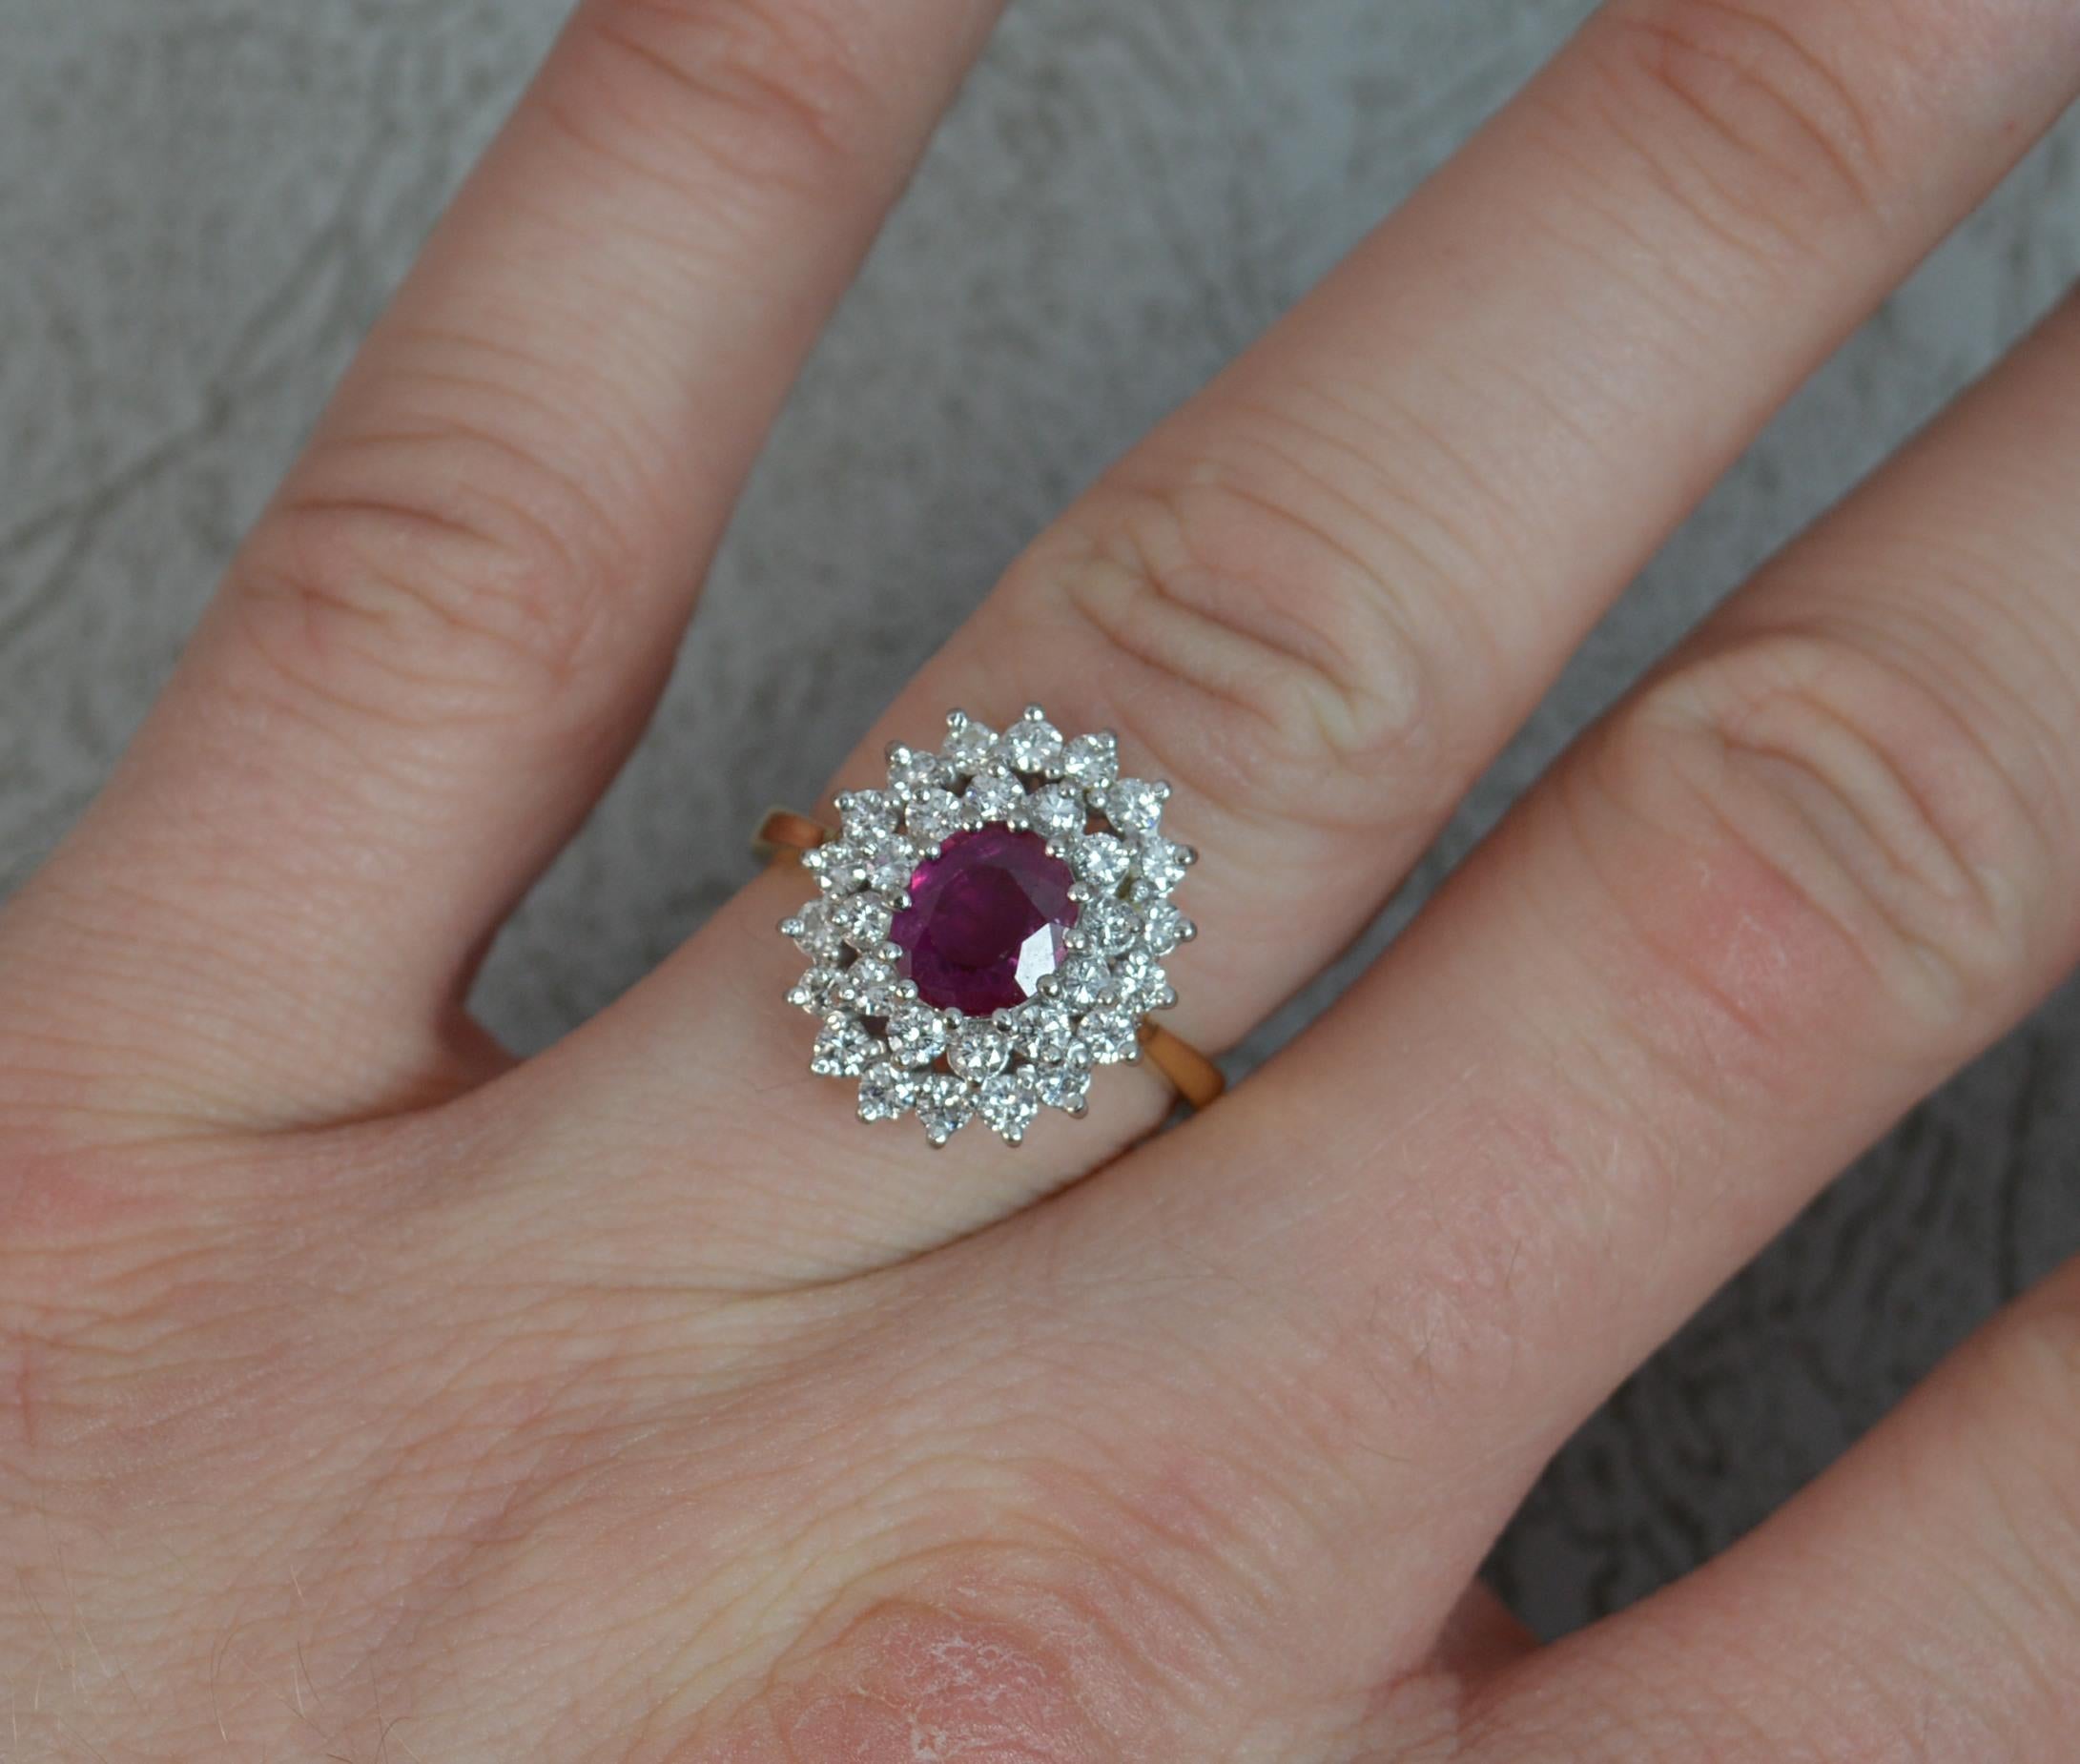 A superb Ruby and Diamond cluster ring in 18ct Gold.
Designed with an oval cut ruby to centre, vivid pink red colour. Surrounding are two rows of round brilliant cut diamonds to total over 0.75cts.
14.2mm x 16mm cluster head, protruding 8.5mm off